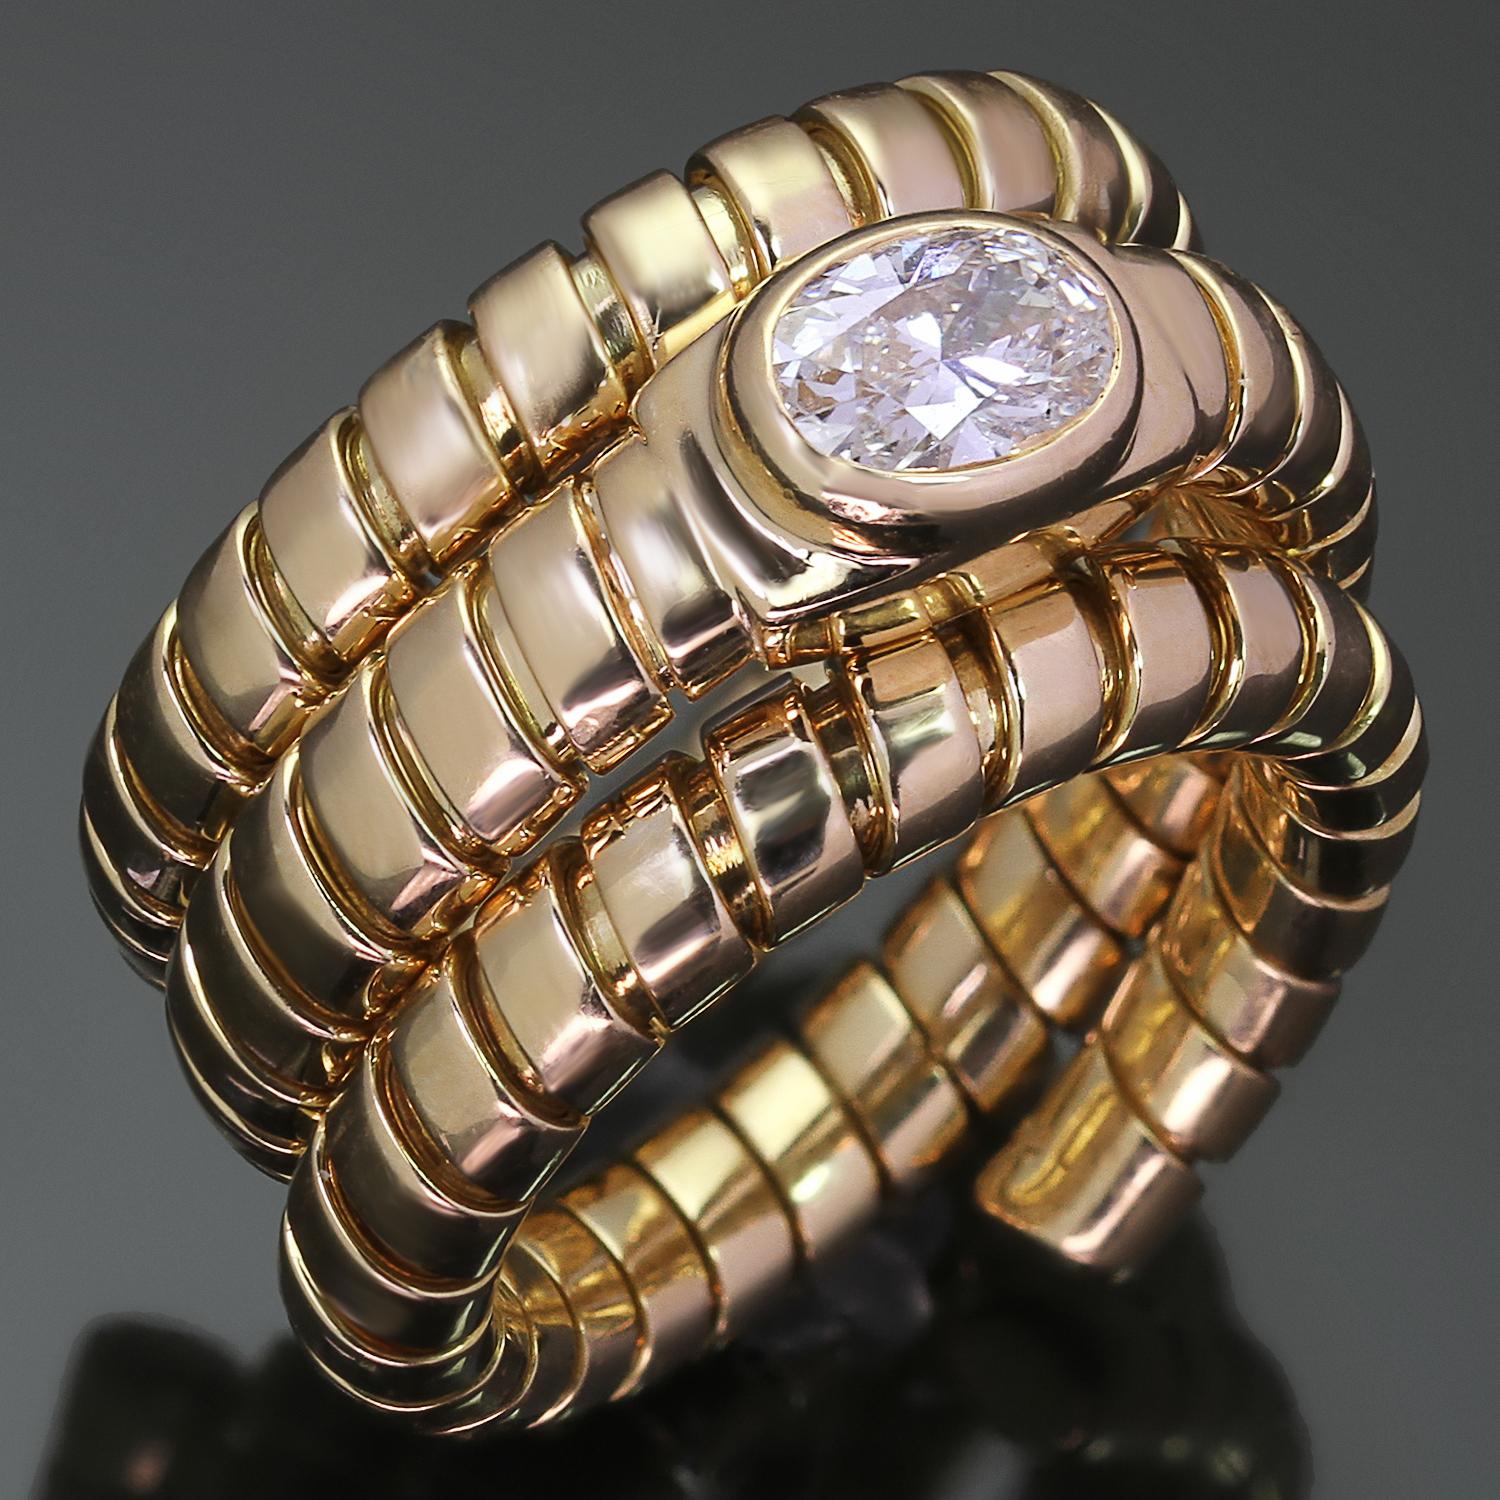 This gorgeous authentic Bvlgari ring from the iconic Tubogas collection features a slightly adjustable 3-row wrap design crafted in 18k yellow gold and set with an oval F-G-H VVS2-VS1 diamond. Made in Italy circa 1990s. Measurements: 0.51